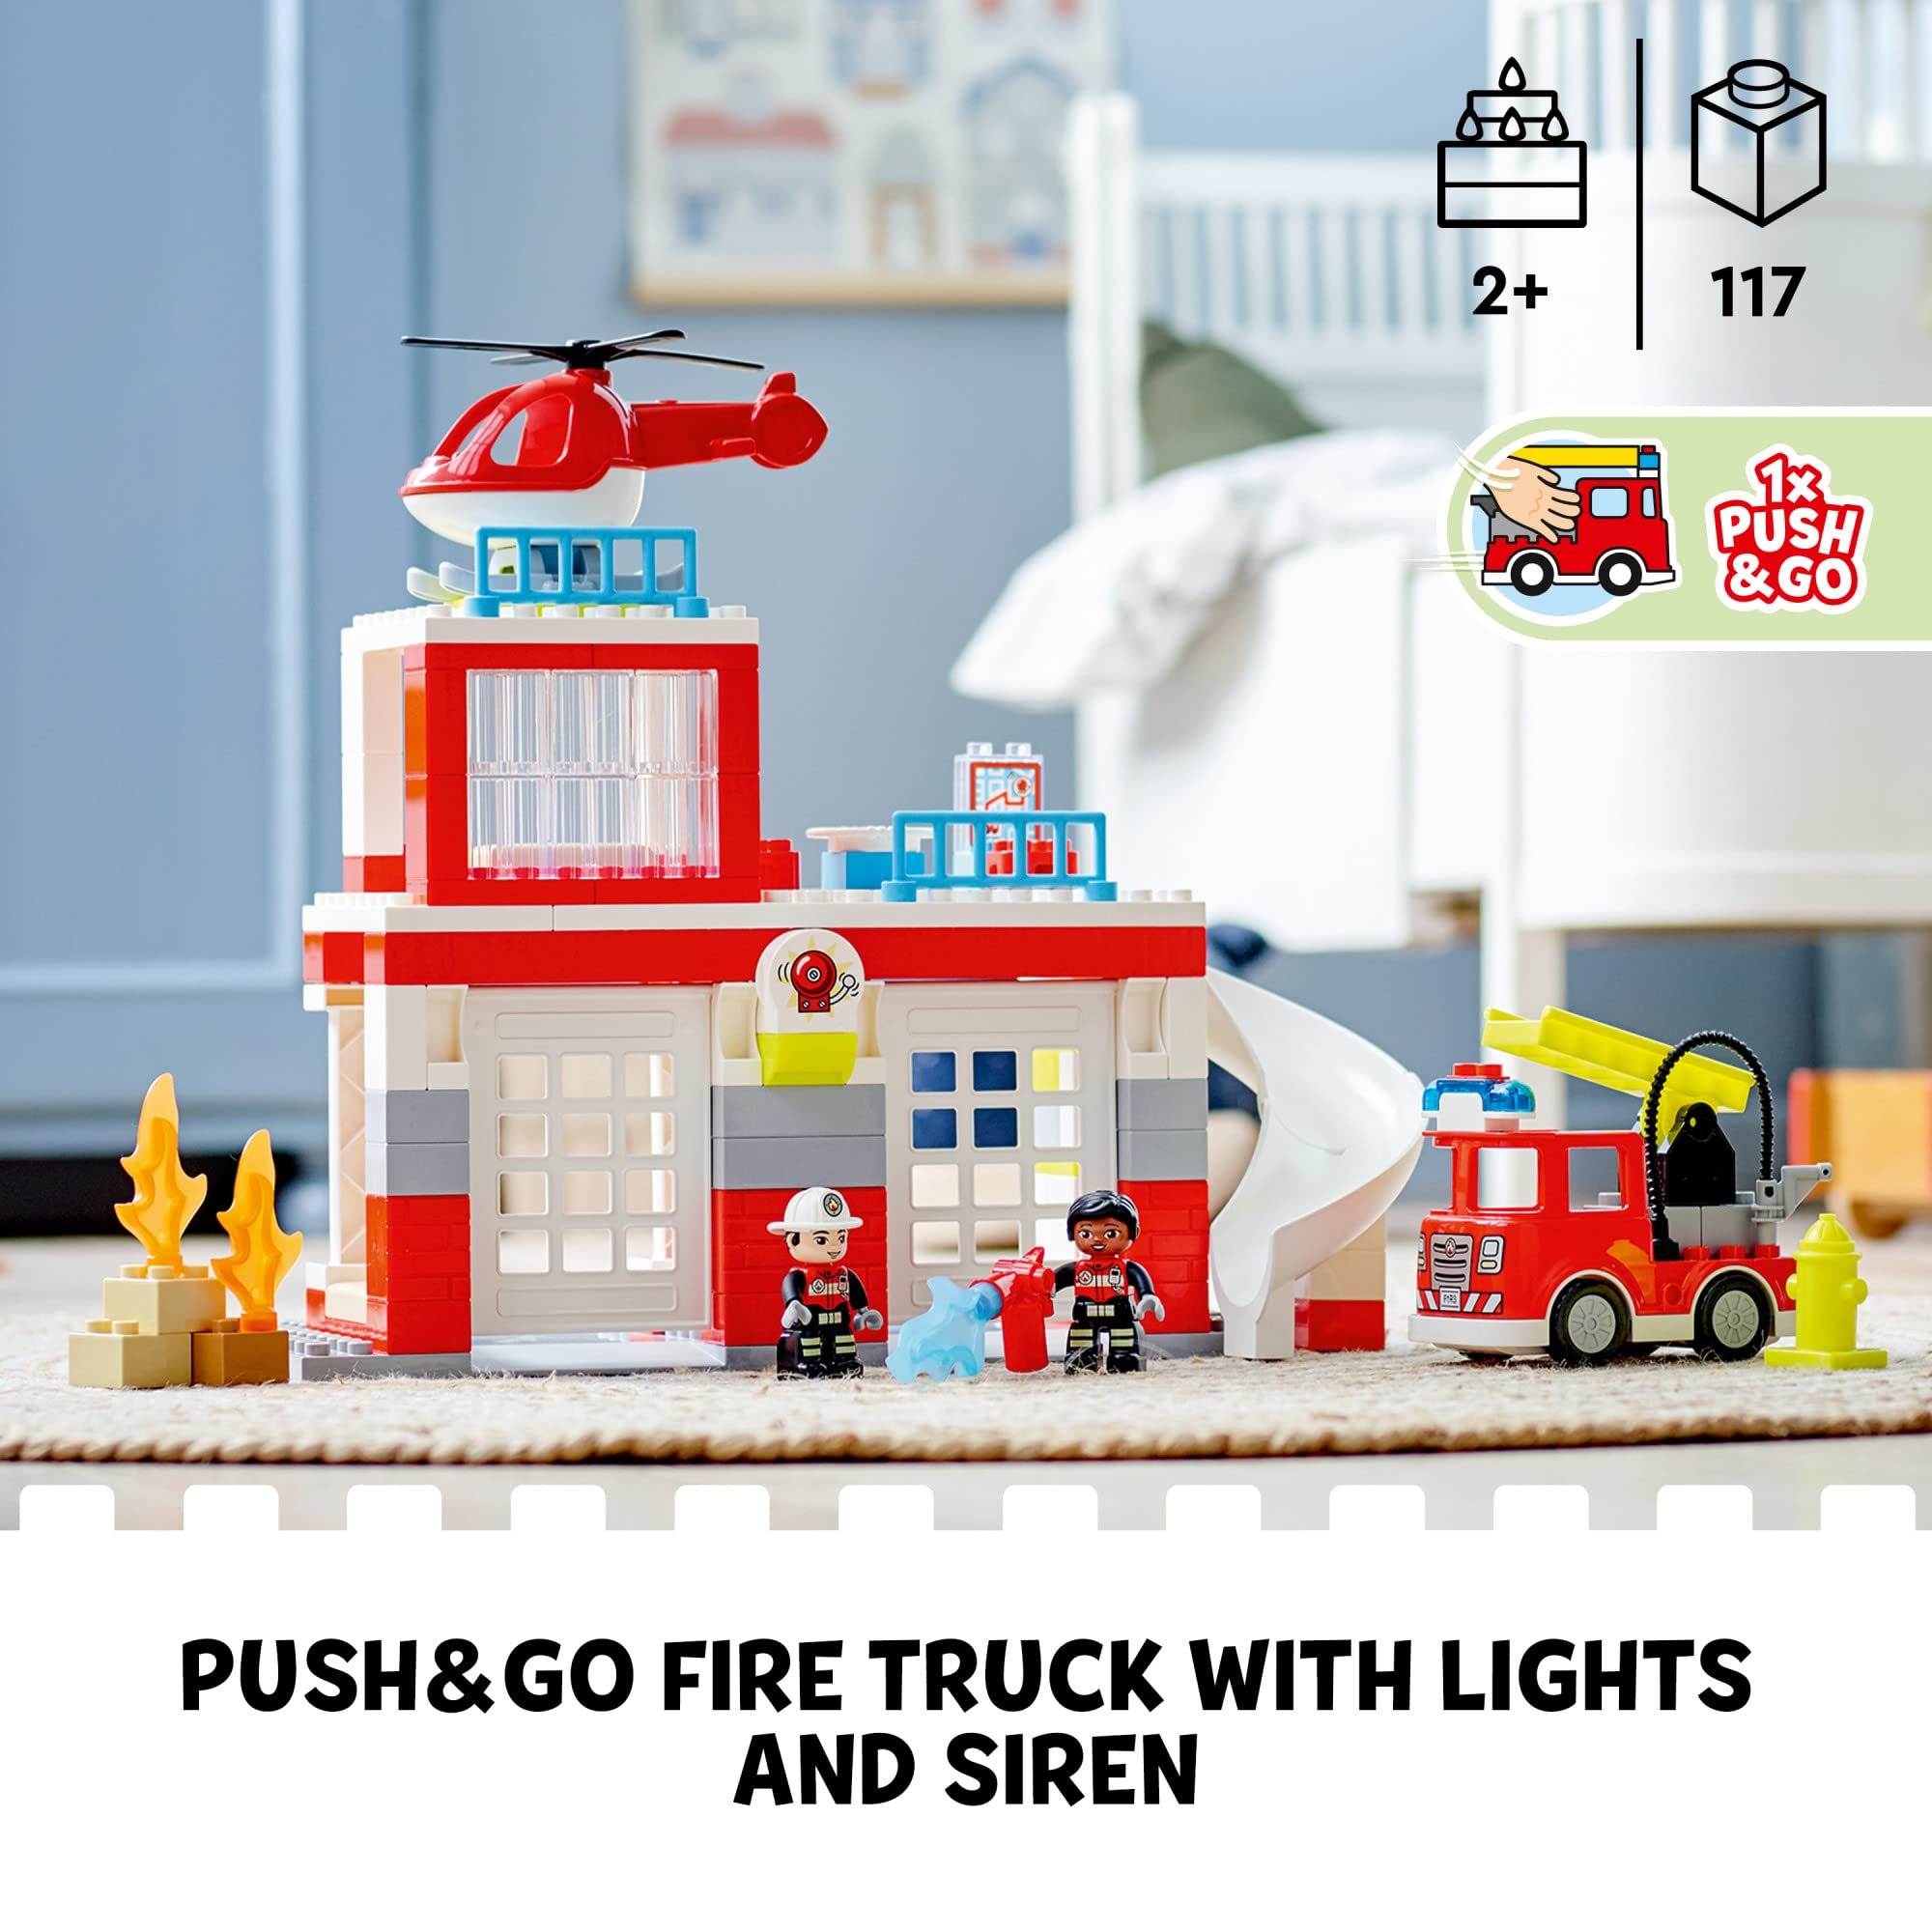 LEGO DUPLO Fire Station & Helicopter Playset 10970, with Push & Go Truck Toy for Toddlers, Boys and Girls 2 Plus Years Old, Large Bricks Educational Learning Toys